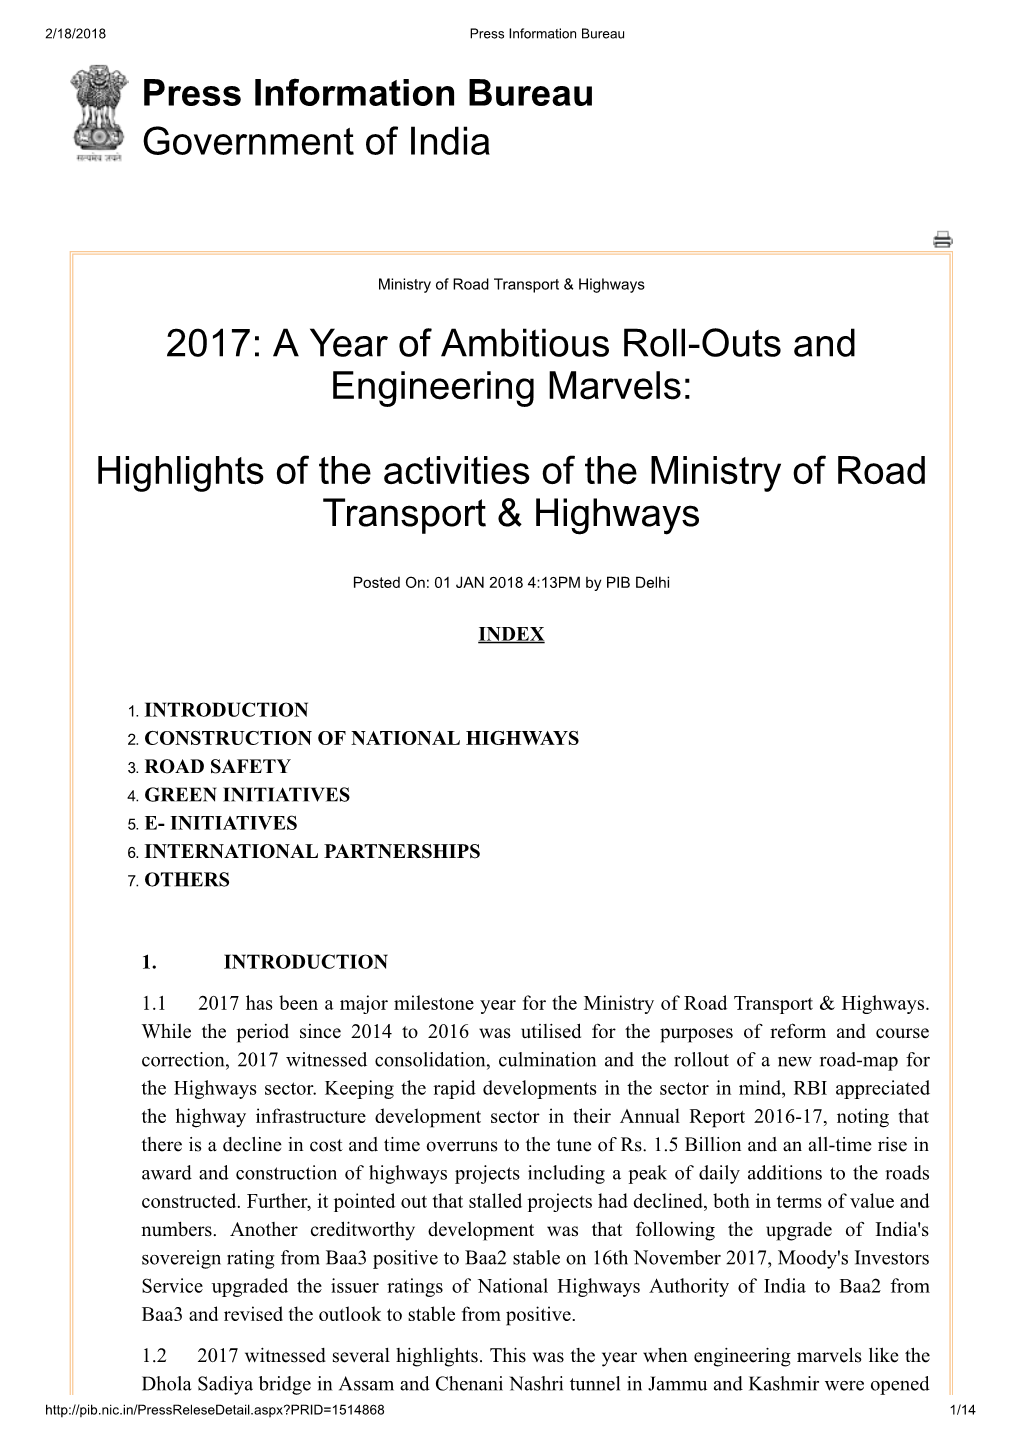 Highlights of the Activities of the Ministry of Road Transport & Highways